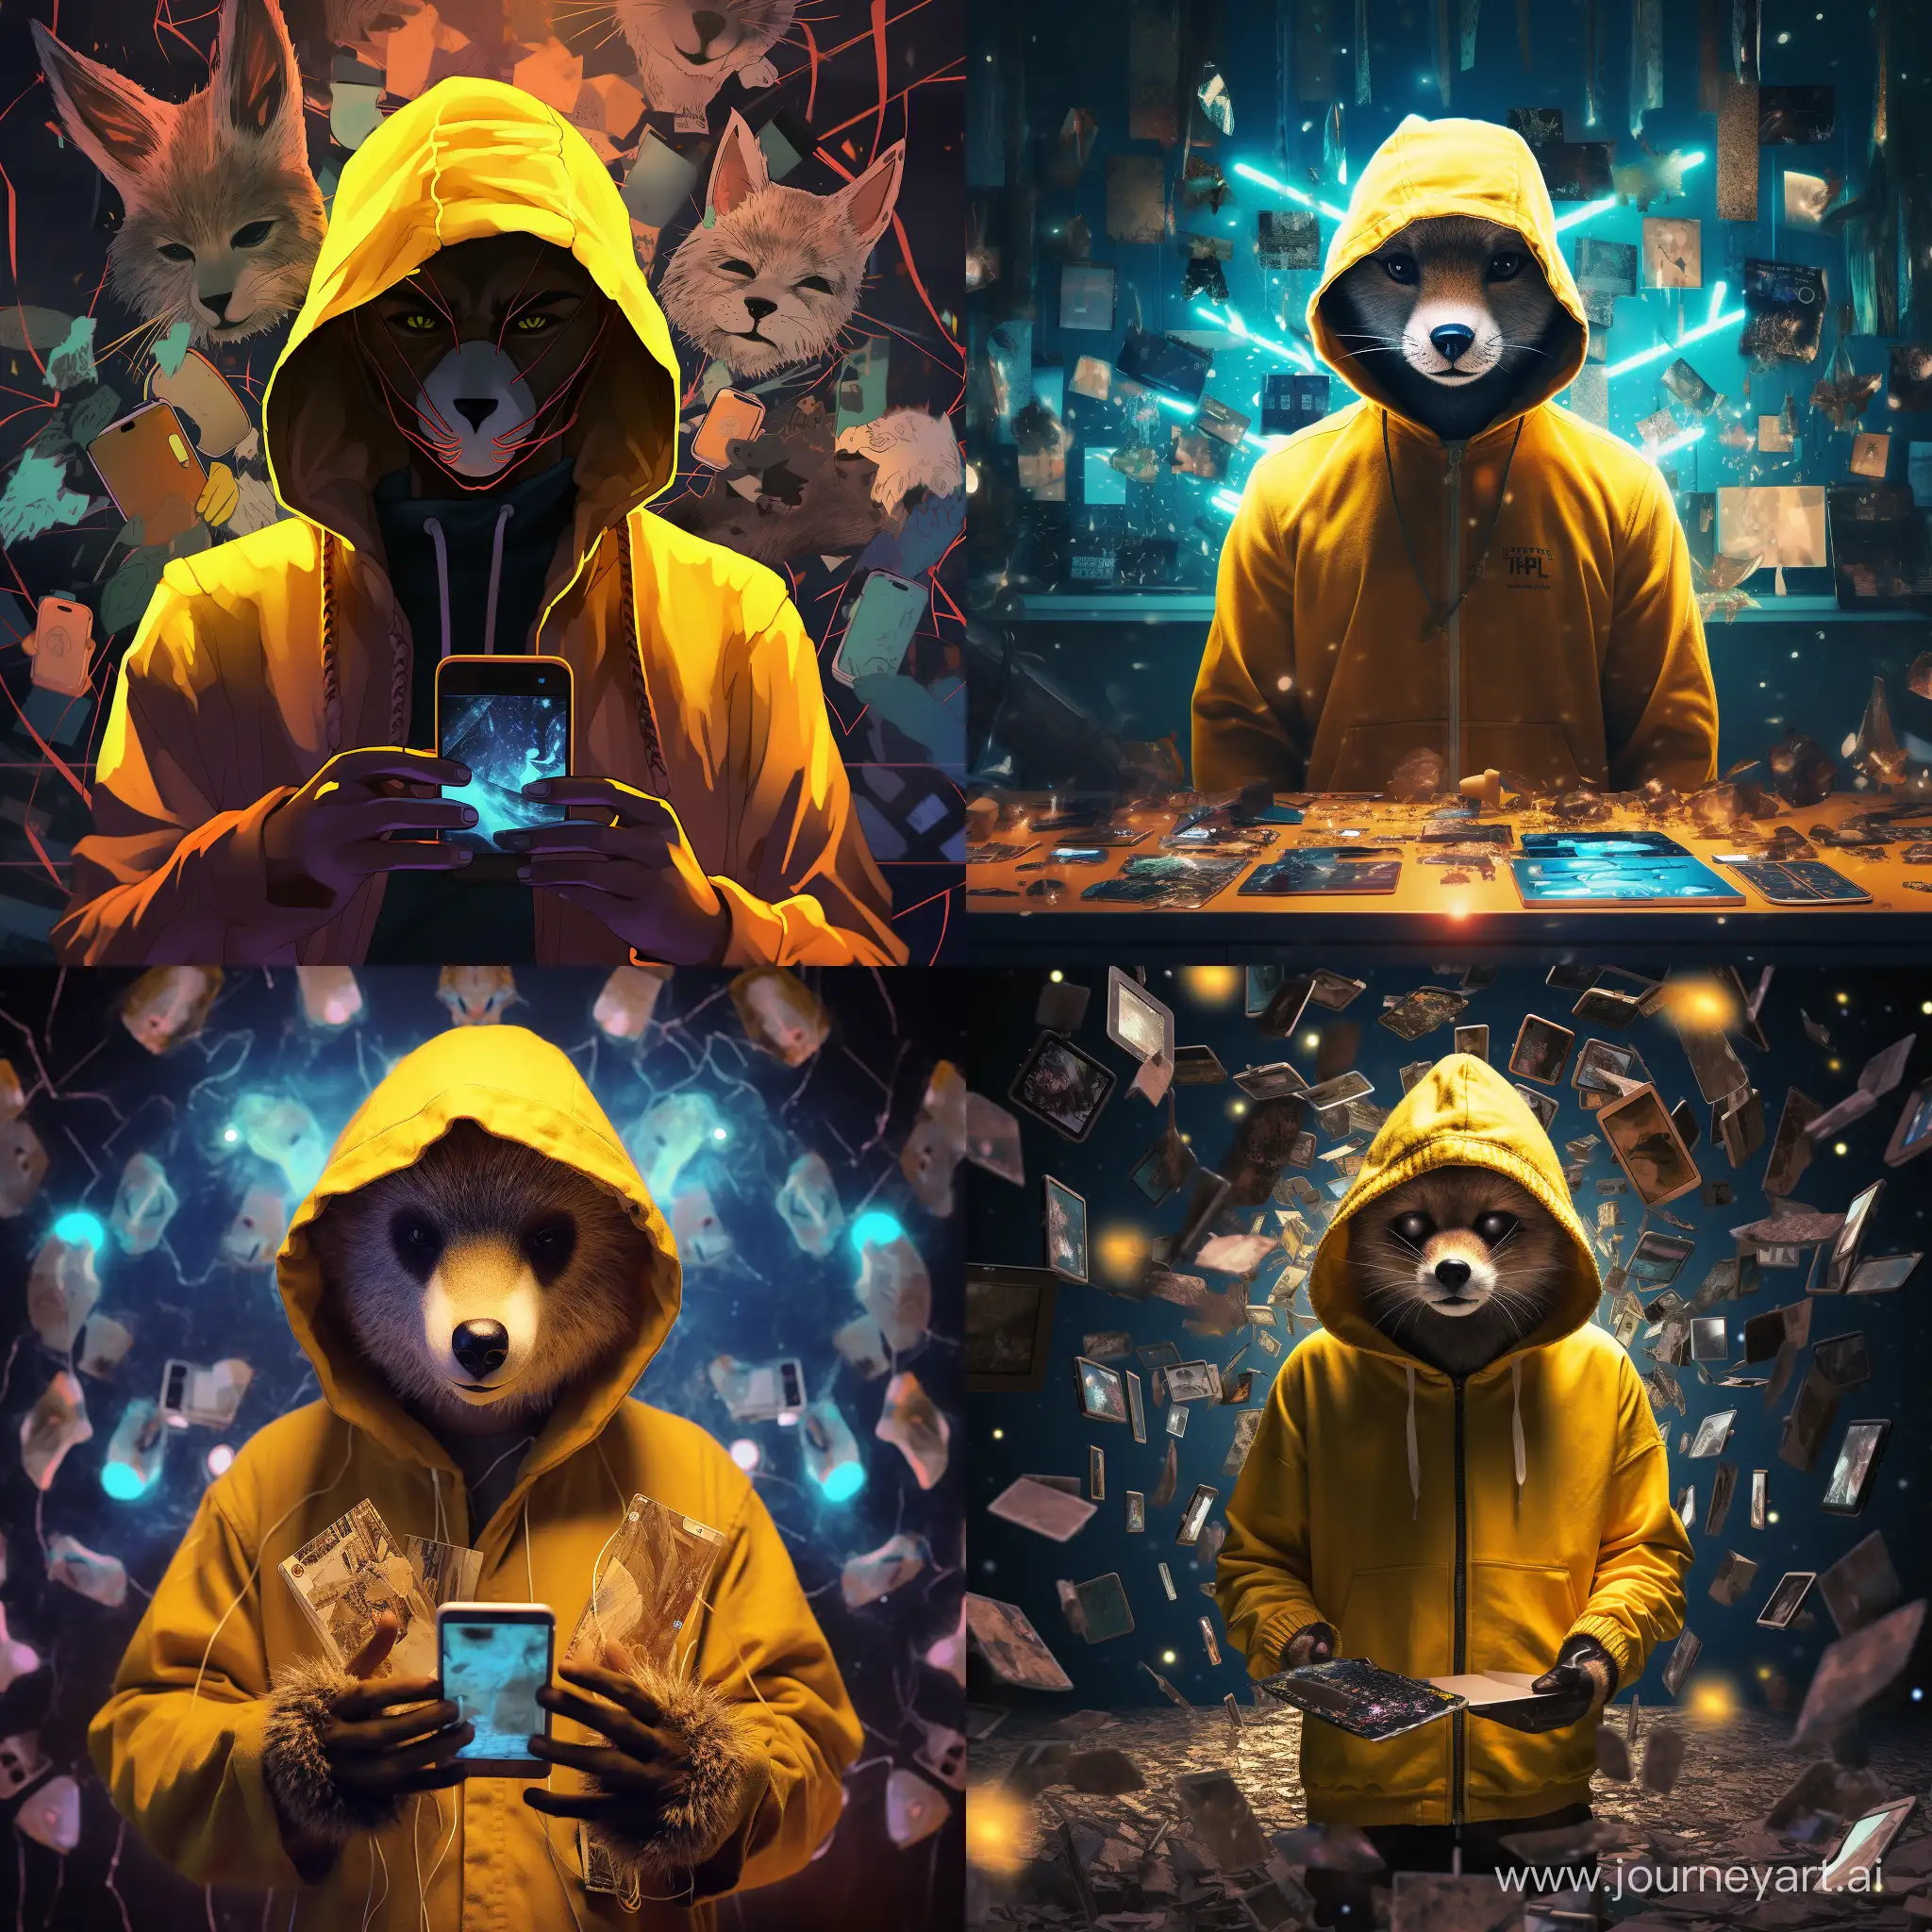 Urban-Explorer-in-Yellow-Hoodie-Surrounded-by-Shattered-iPhones-and-Mysterious-Glow